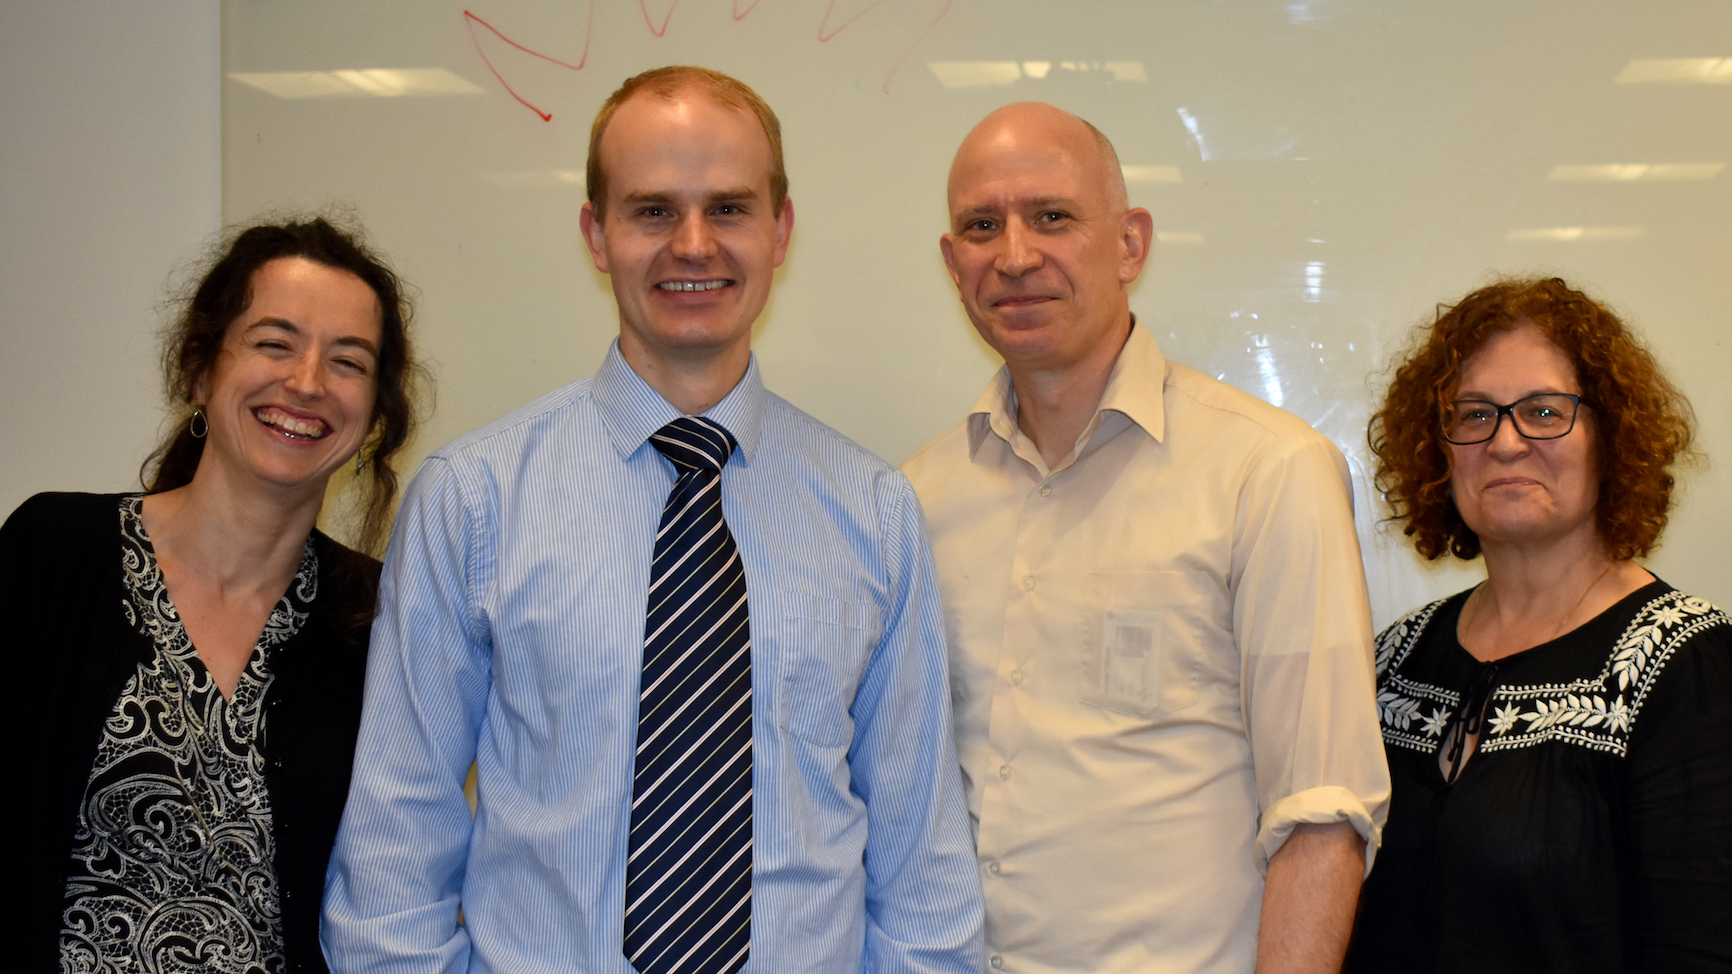 PhD student Jeffrey Green, wearing a tie, standing in front of a whiteboard with three members of his dissertation committee, 